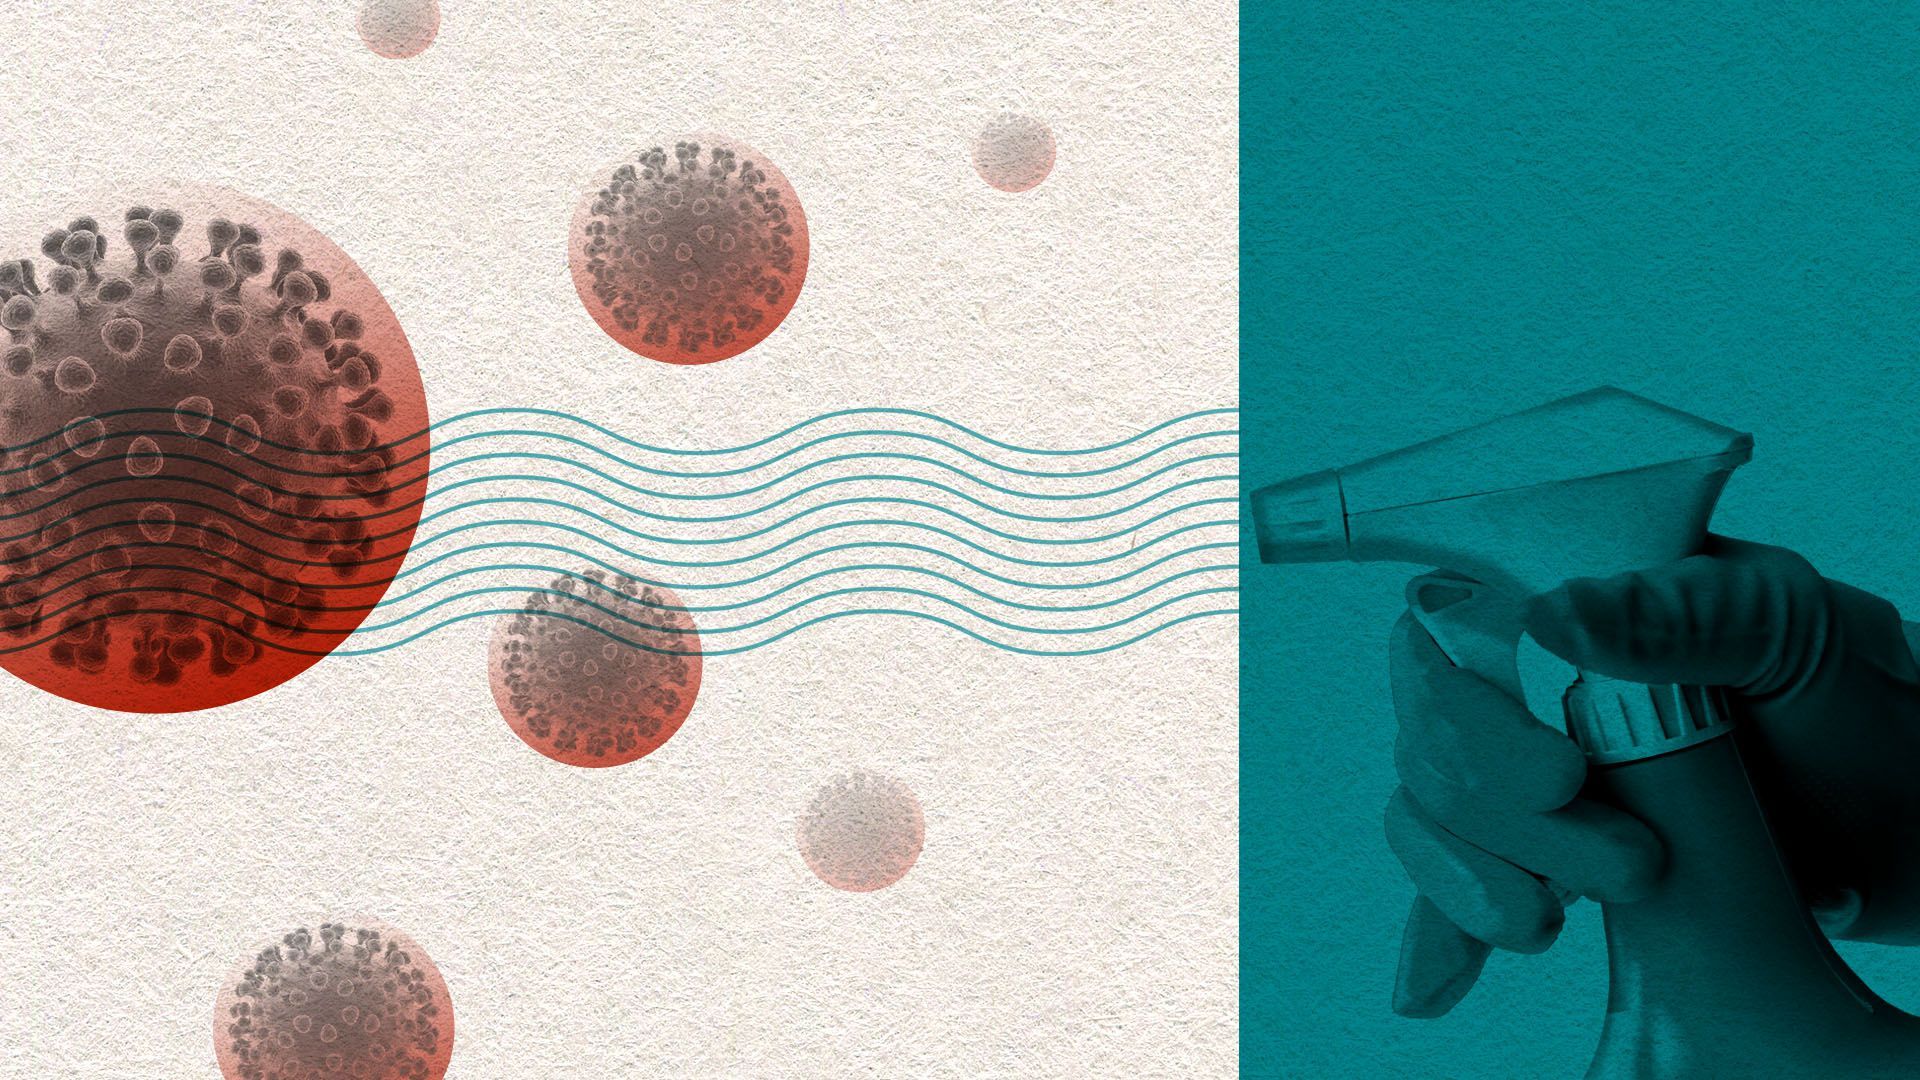 Illustration of a spray bottle spraying a collection of virus cells